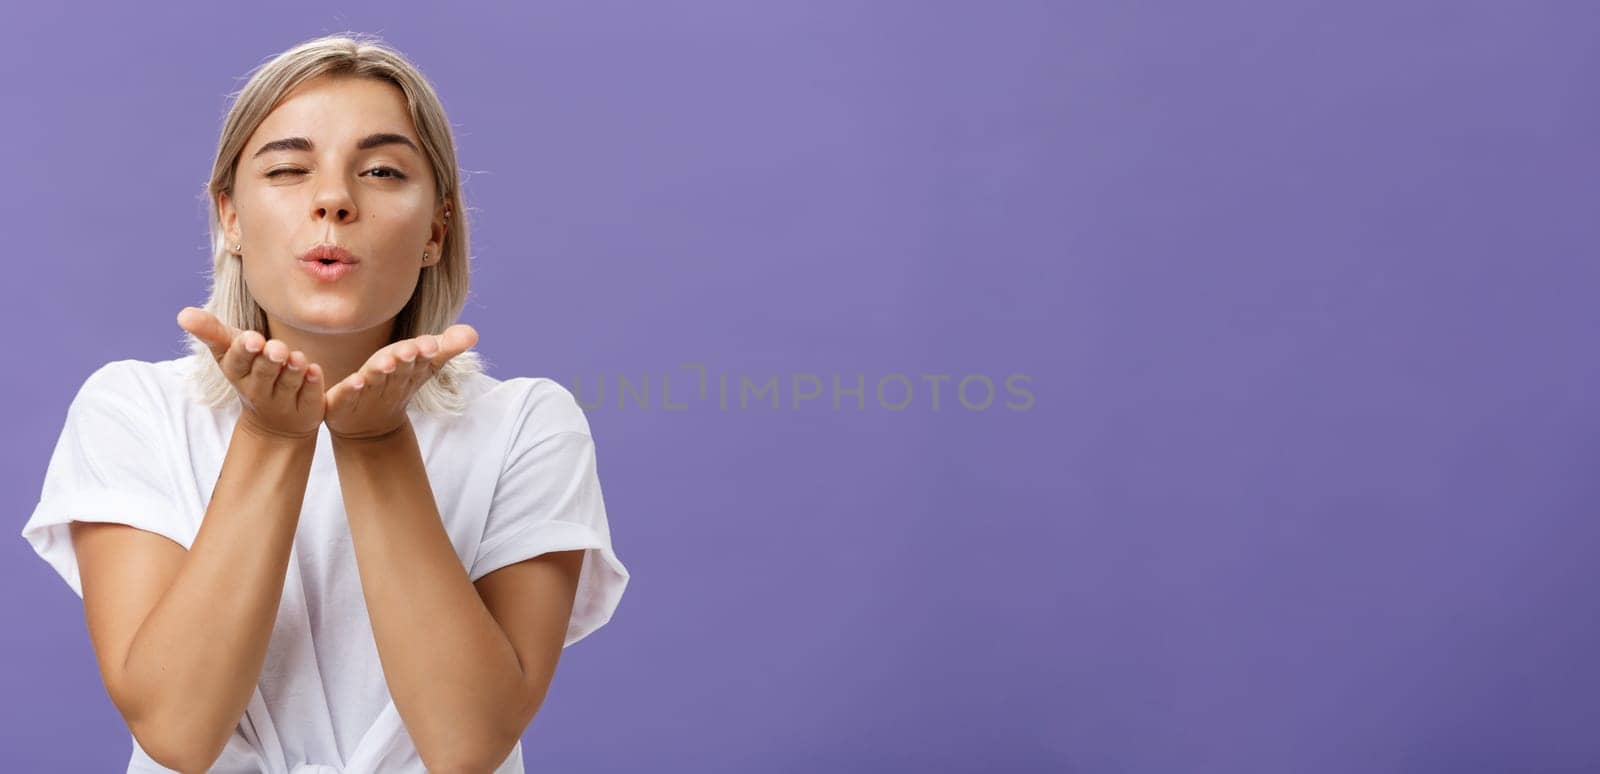 Blowing sweet kiss to all fans. Flirty tender and cute stylish european female with blond hair and tanned skin holding palms near mouth folding lips while sending mwah at camera over purple wall.